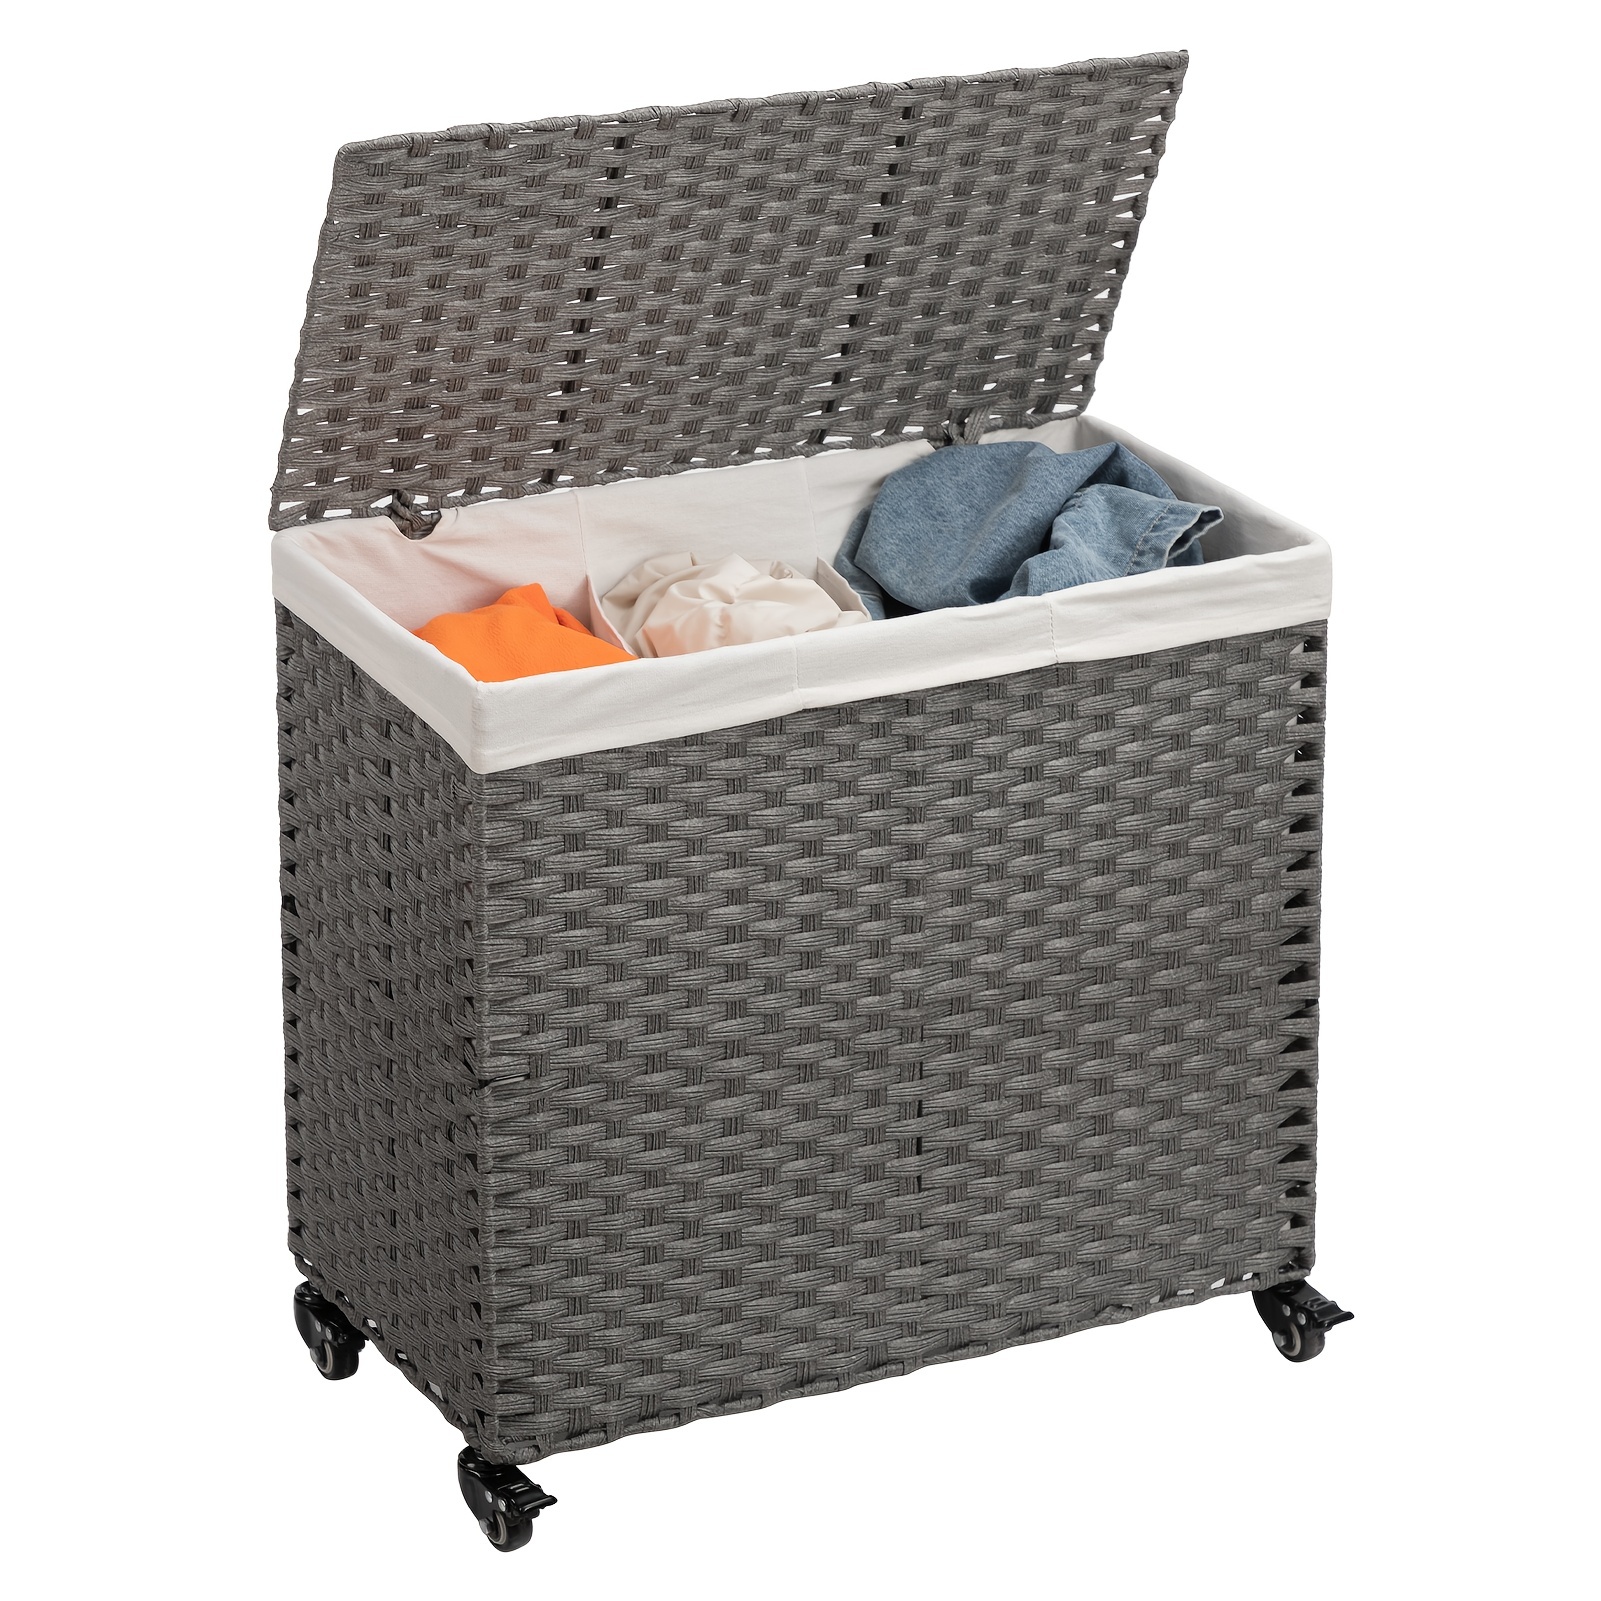 Lifewit Double Laundry Hamper with Lid and Removable Laundry Bags, Large  Collapsible 2 Dividers Dirty Clothes Basket with Handles for Bedroom,  Laundry Room, Closet, Bathroom, College, Grey